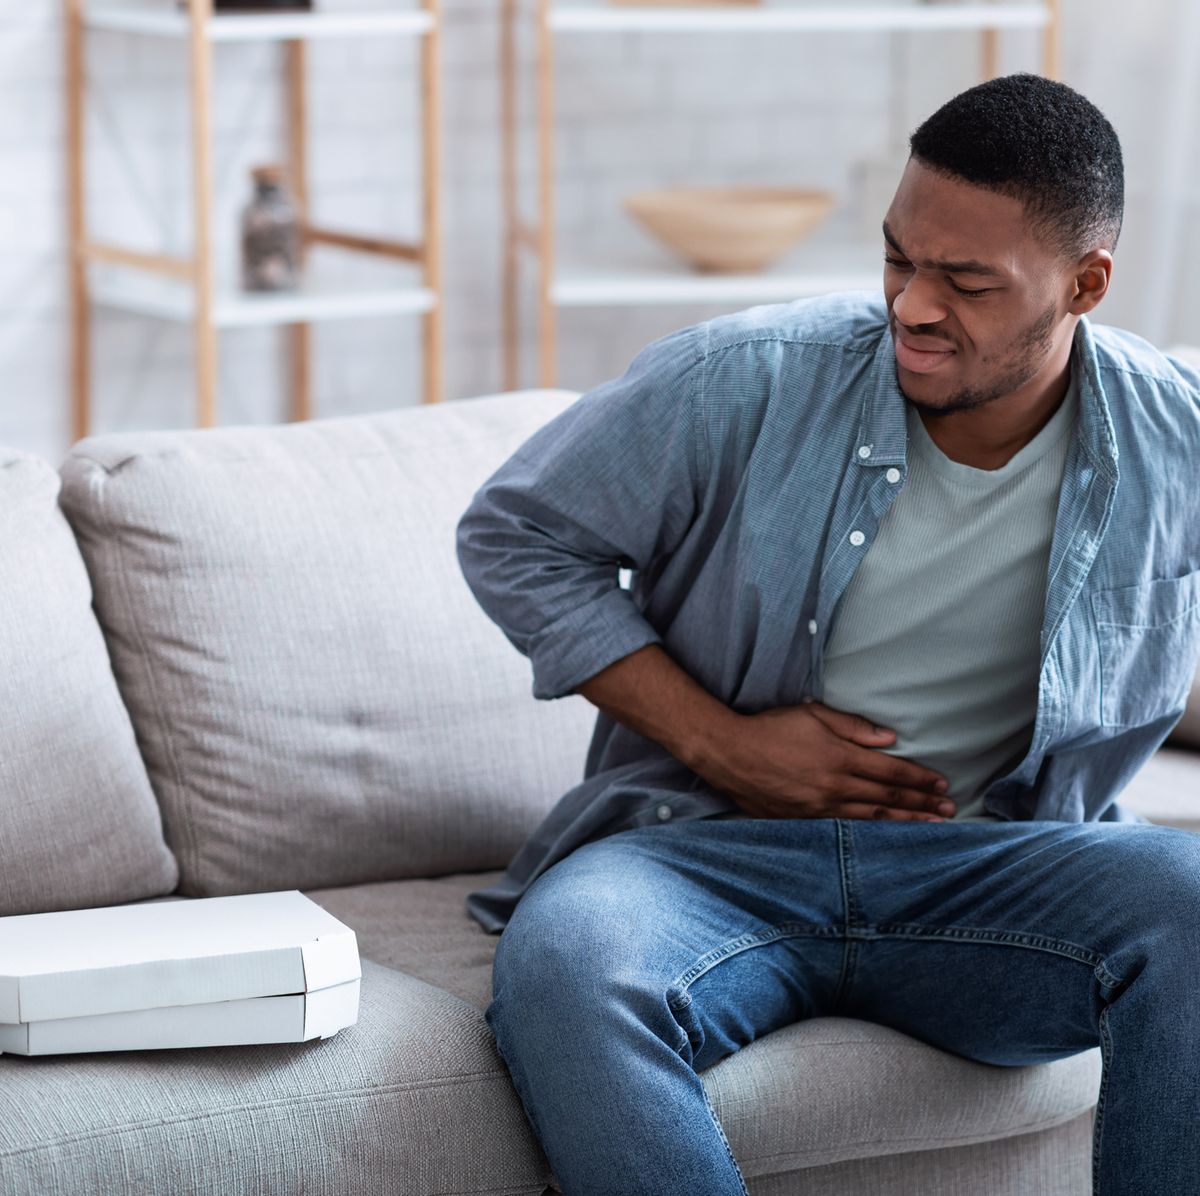 african american guy having stomachache after eating pizza touching aching stomach suffering from pain sitting on sofa at home food poisoning, gastritis, abdominal inflammation and appendicitis